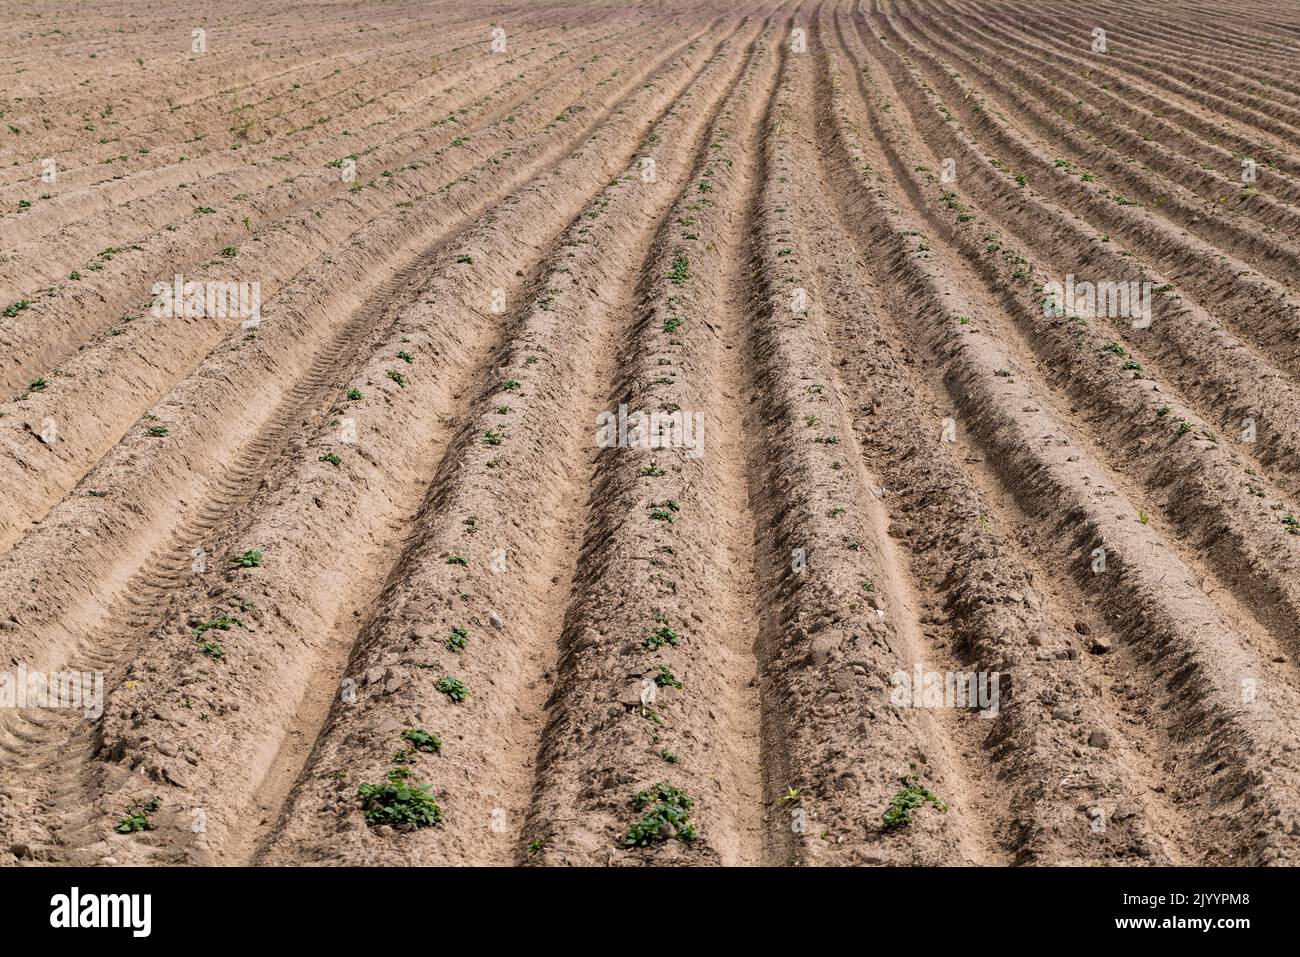 A field with furrows in which potatoes grow, an agricultural field where potatoes are grown Stock Photo